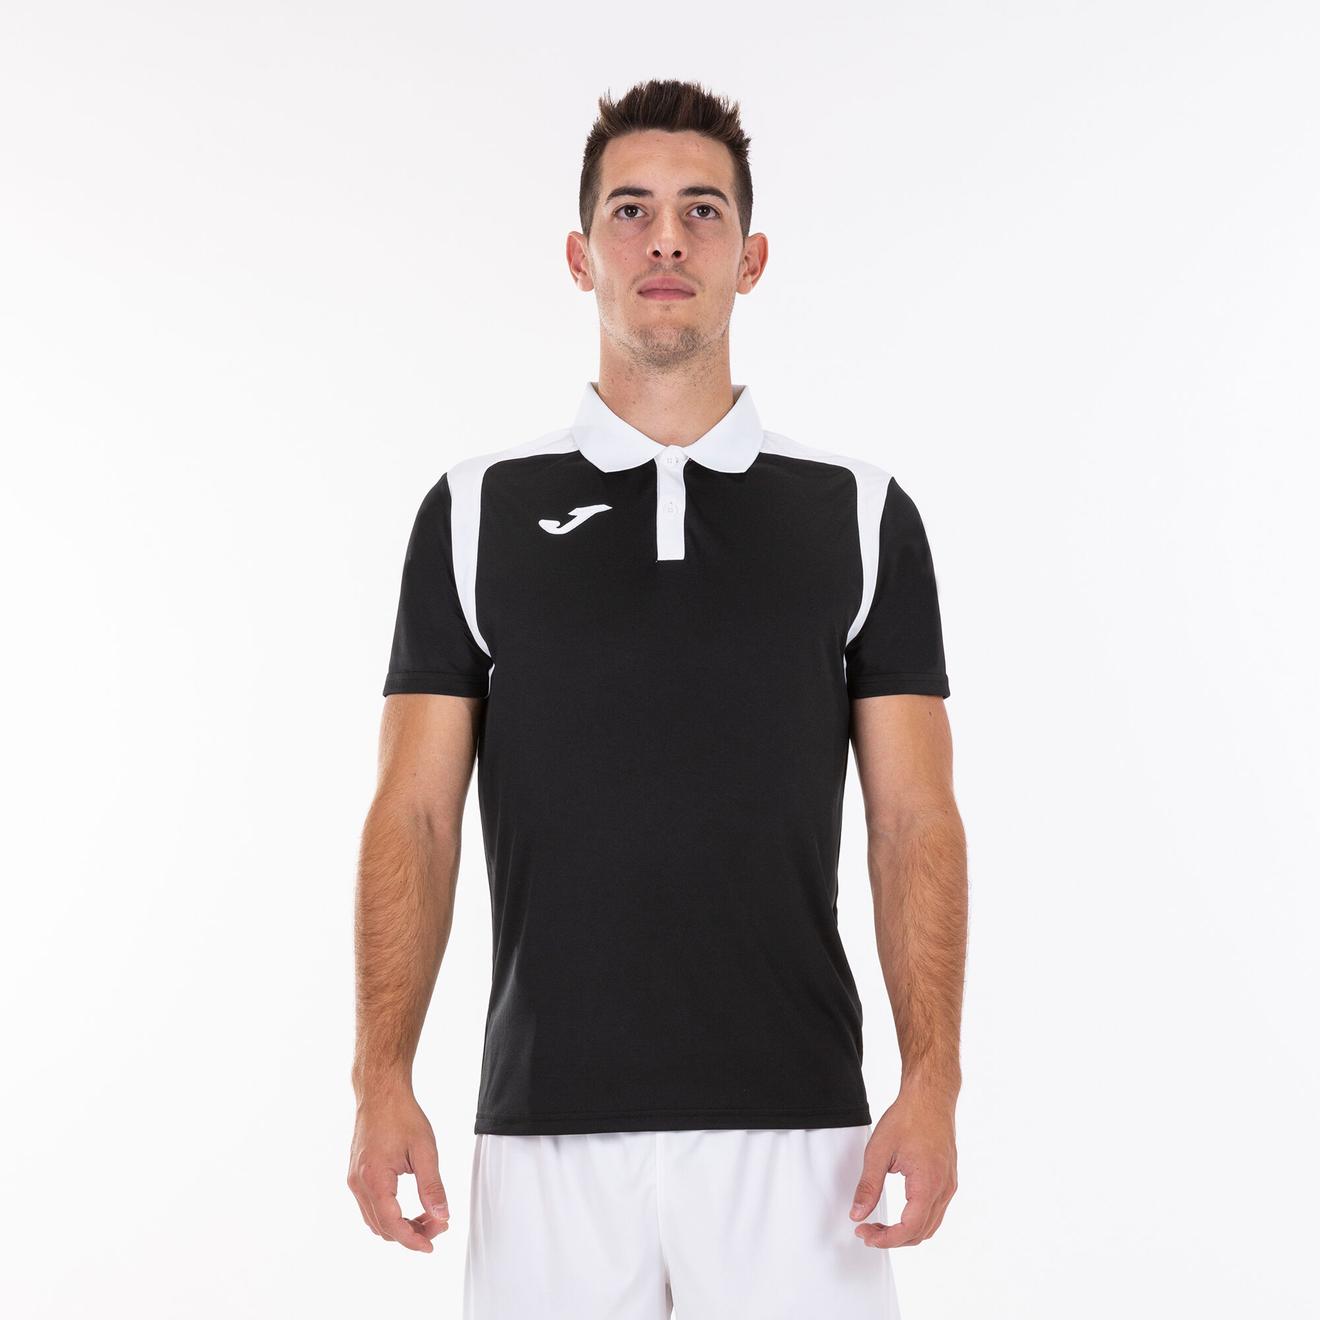 Polo shirt short-sleeve man Championship V black white offers at £11.51 in Joma